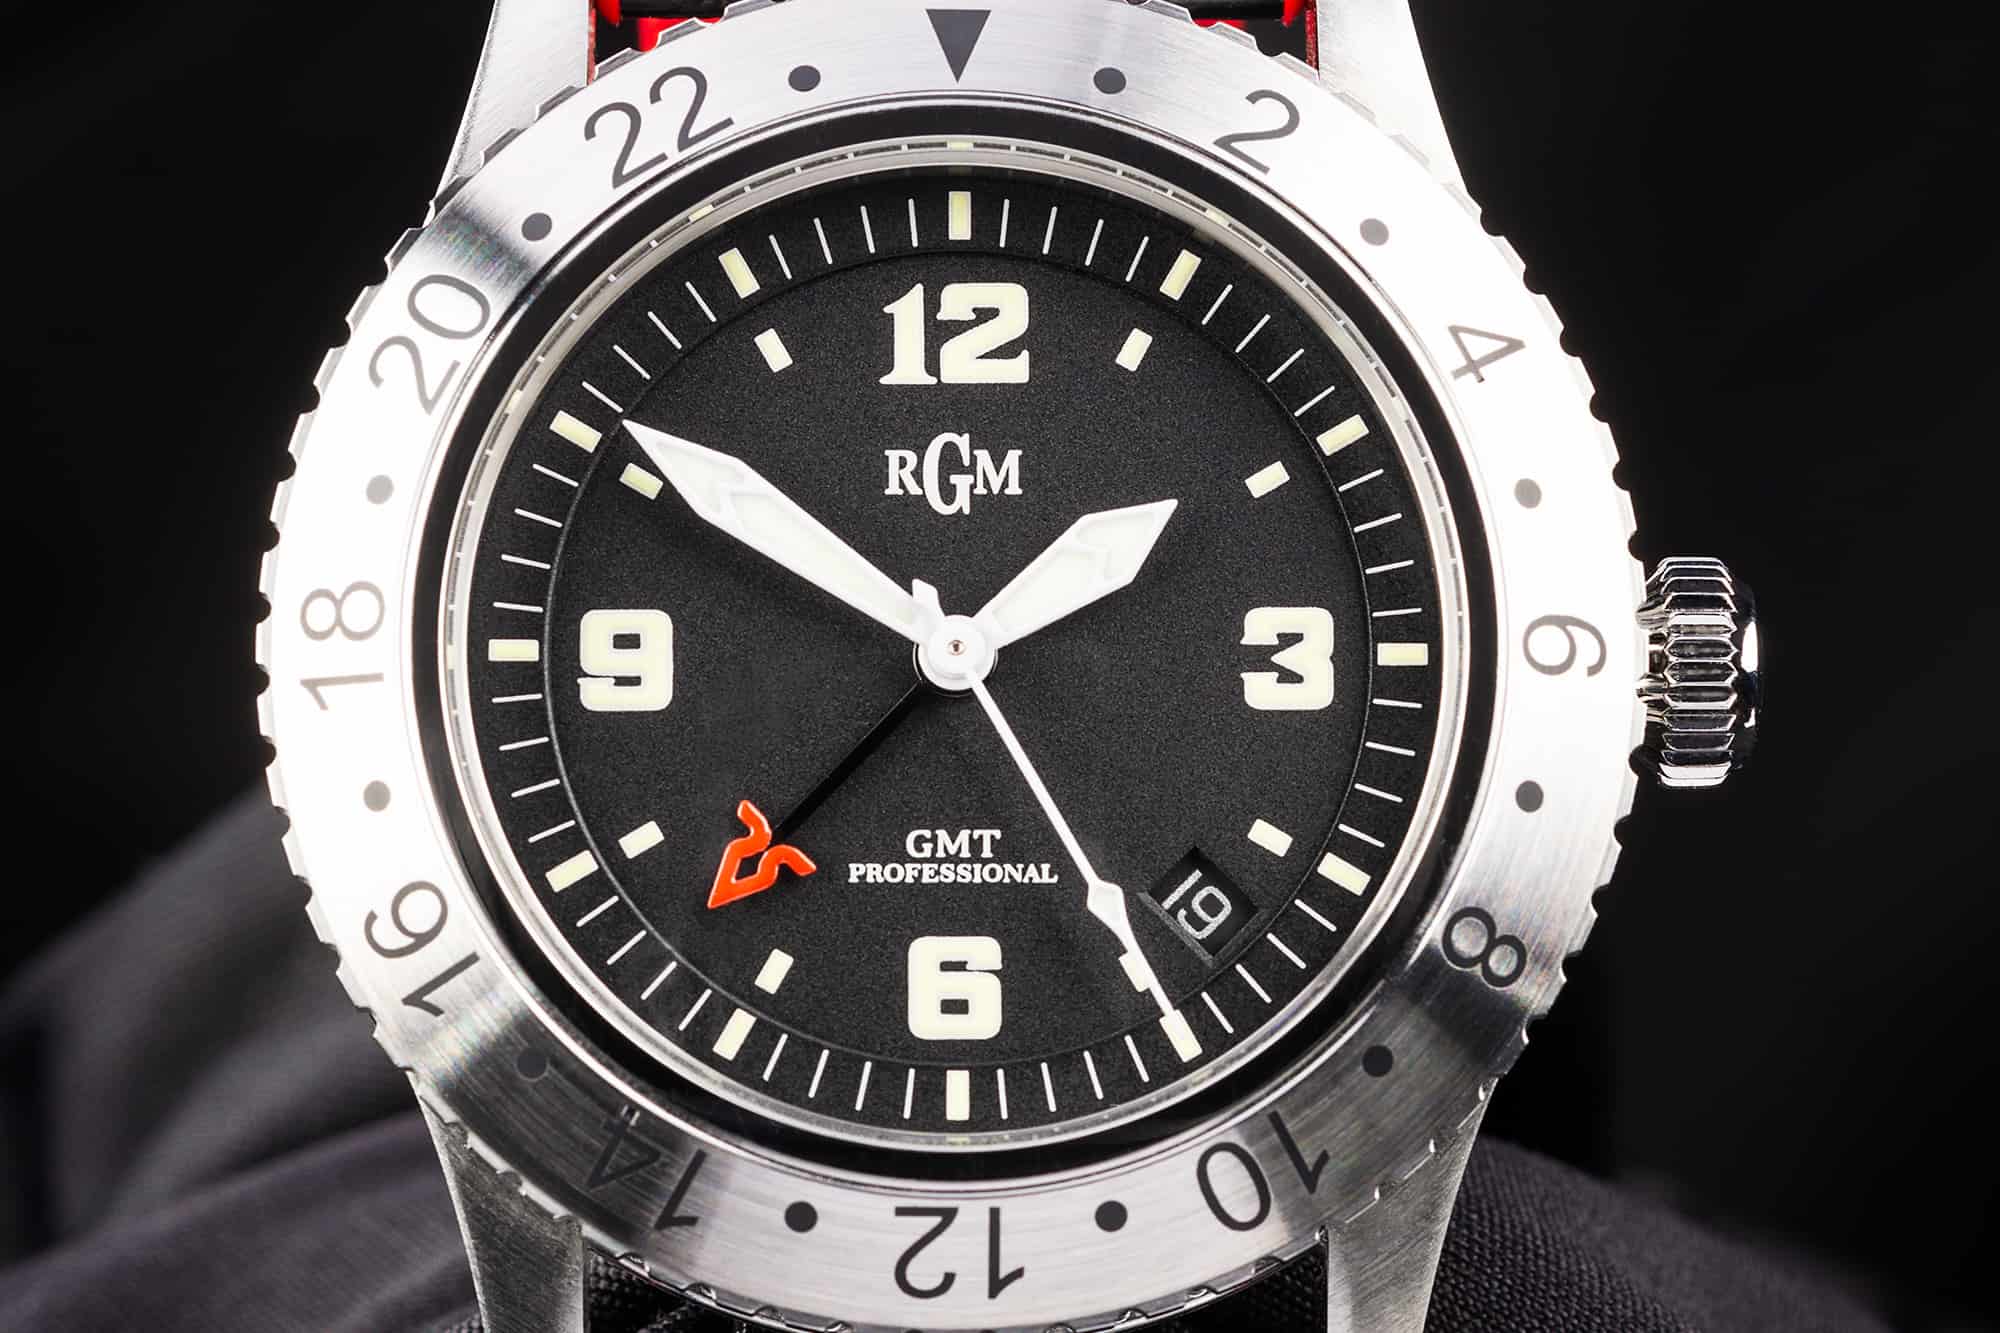 When Bikes and Watches Collide (but not literally): the RGM Model 500-GMT